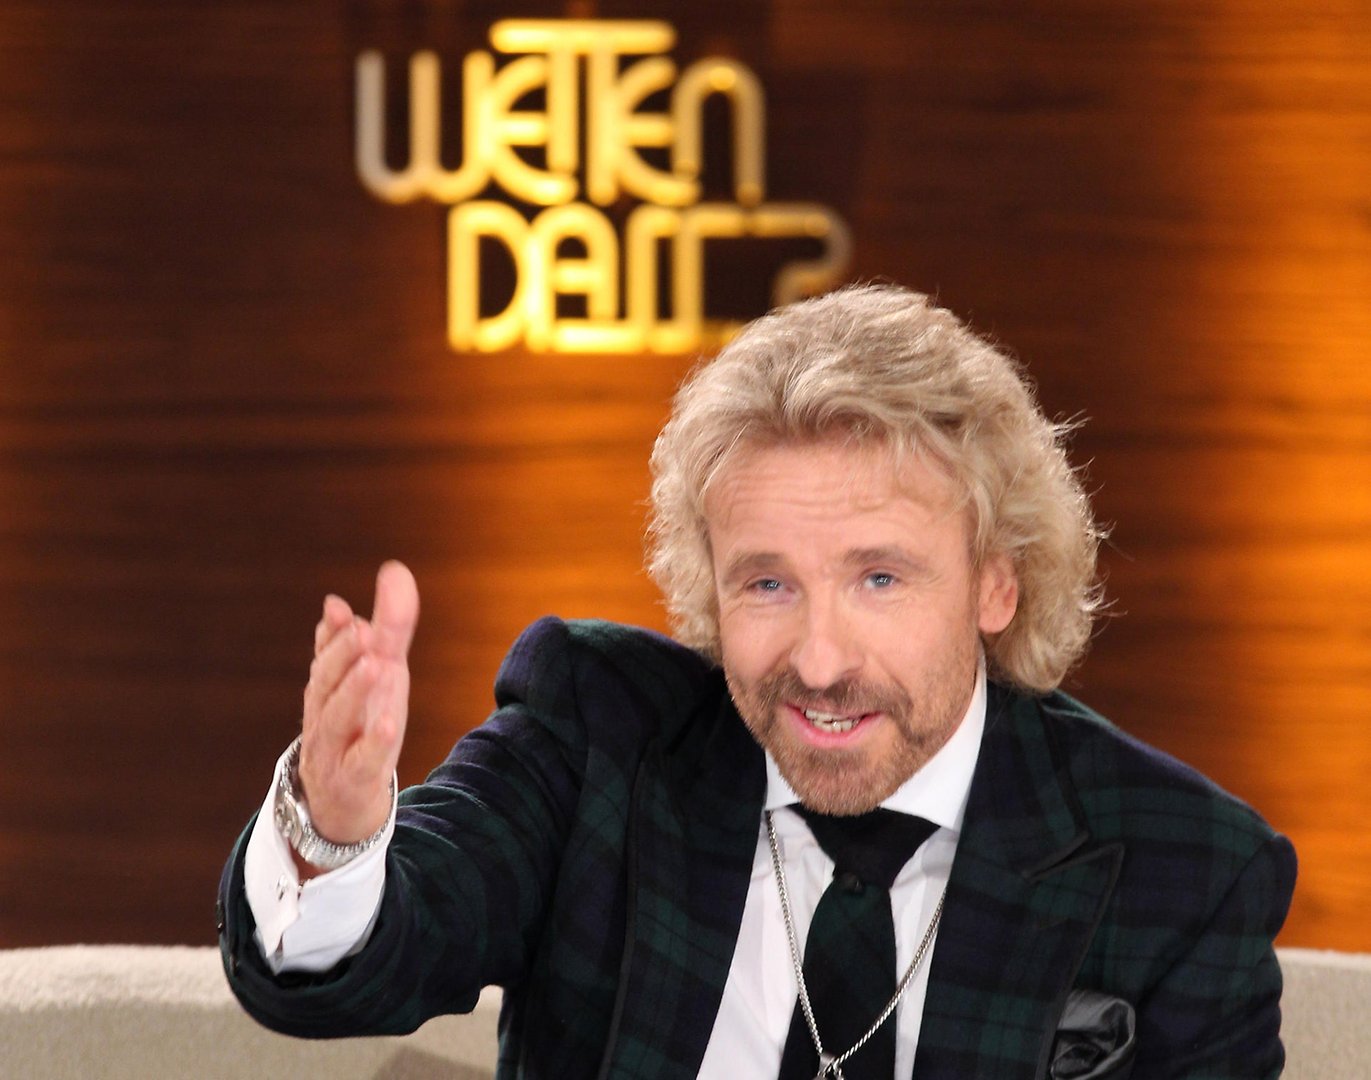 in germany, there was a contestant on the show "wetten dass" (translated as 'bet that') a few years ago. in the show, statements about crazy talents and activities were presented by the participants. The contestants bet on things they could do and get a prize if they could actually perform the self-proclaimed tasks/talents. One participant bet that he would be able to jump over moving cars. It went wrong and he was left a paraplegic. u/easyandout